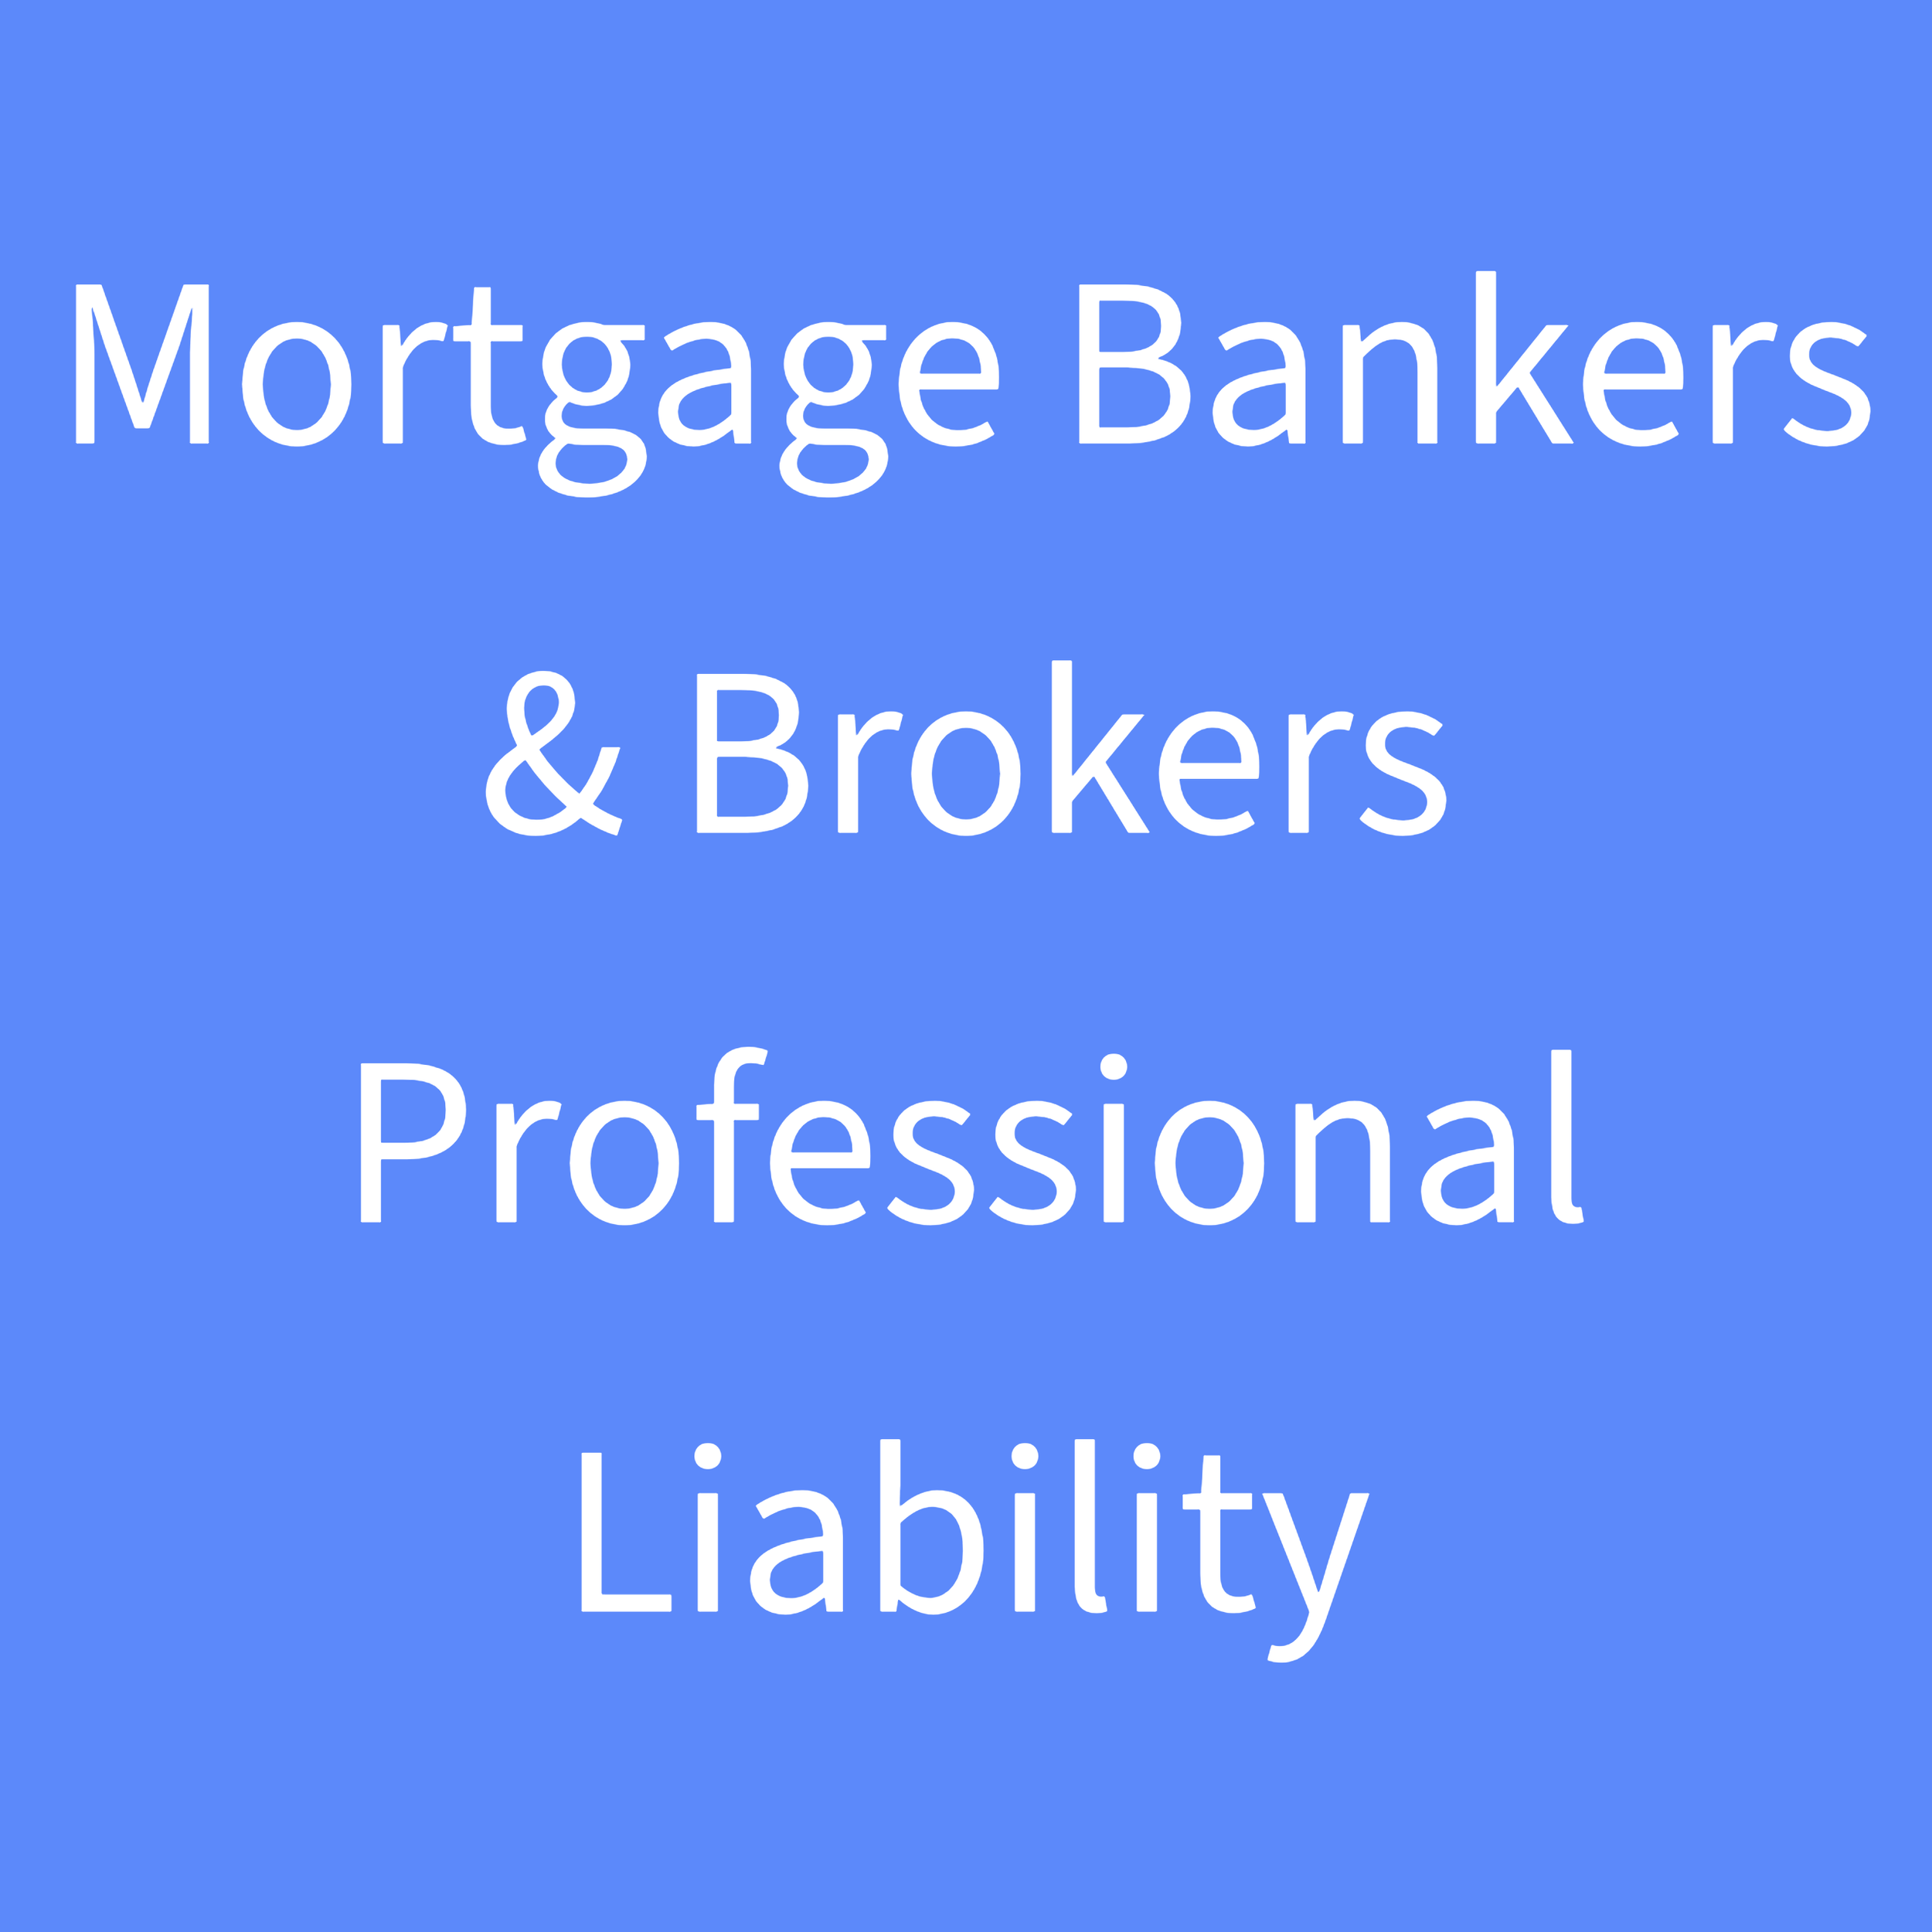 Misc. Professional Liability Apps-16-Mortgage Bankers & Brokers Professional Liability.png